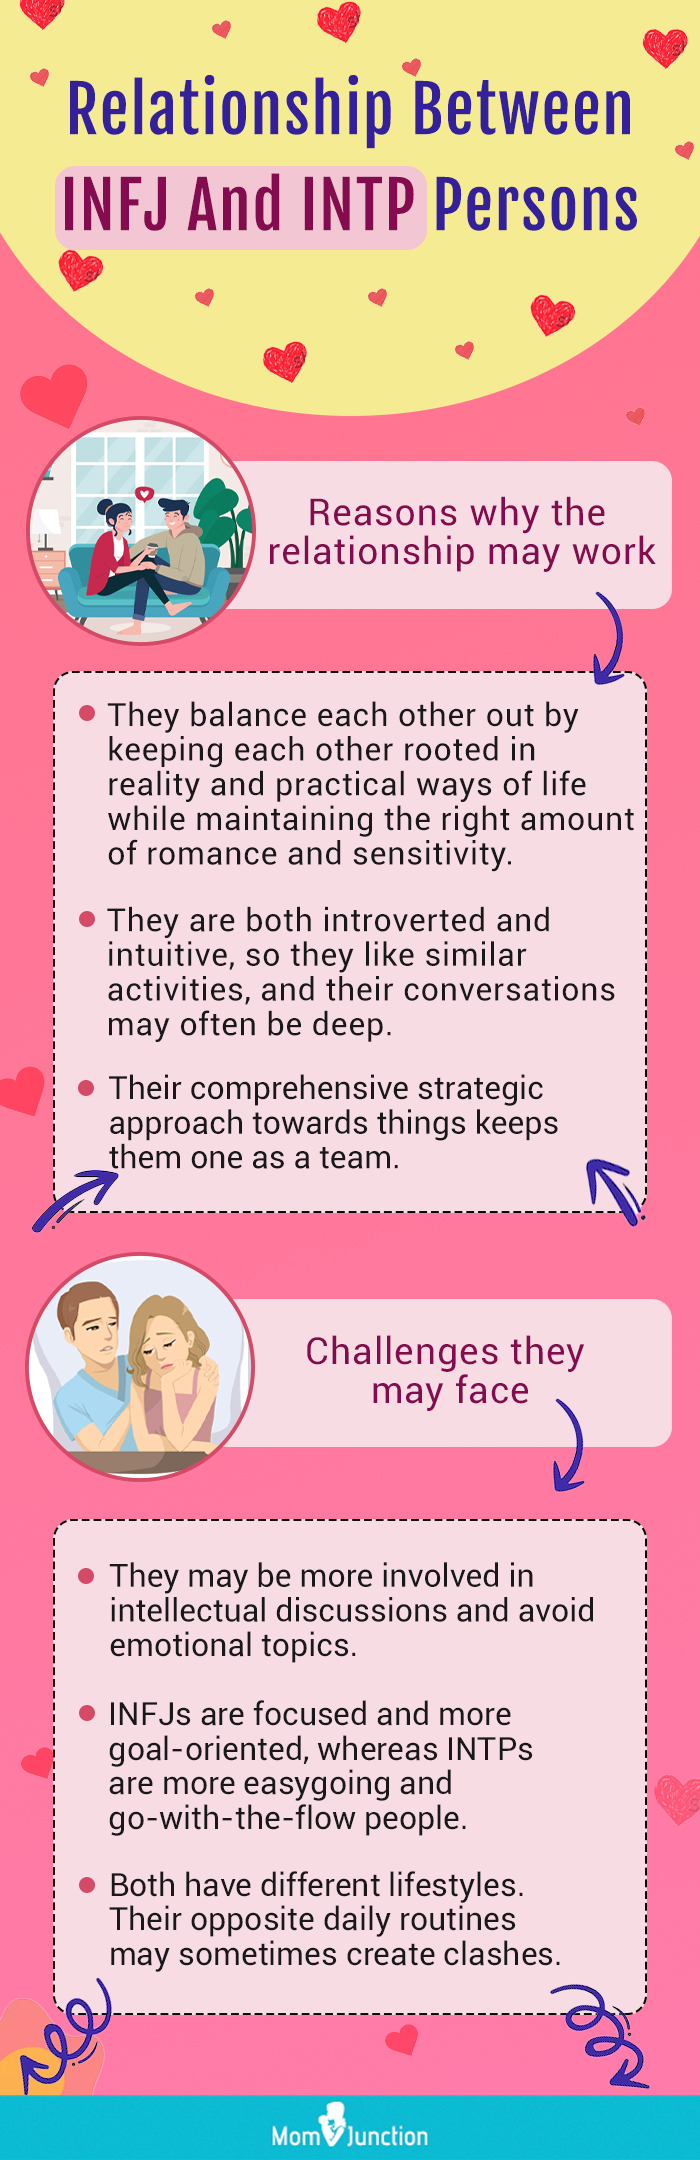 relationship between infj and intp persons (infographic)